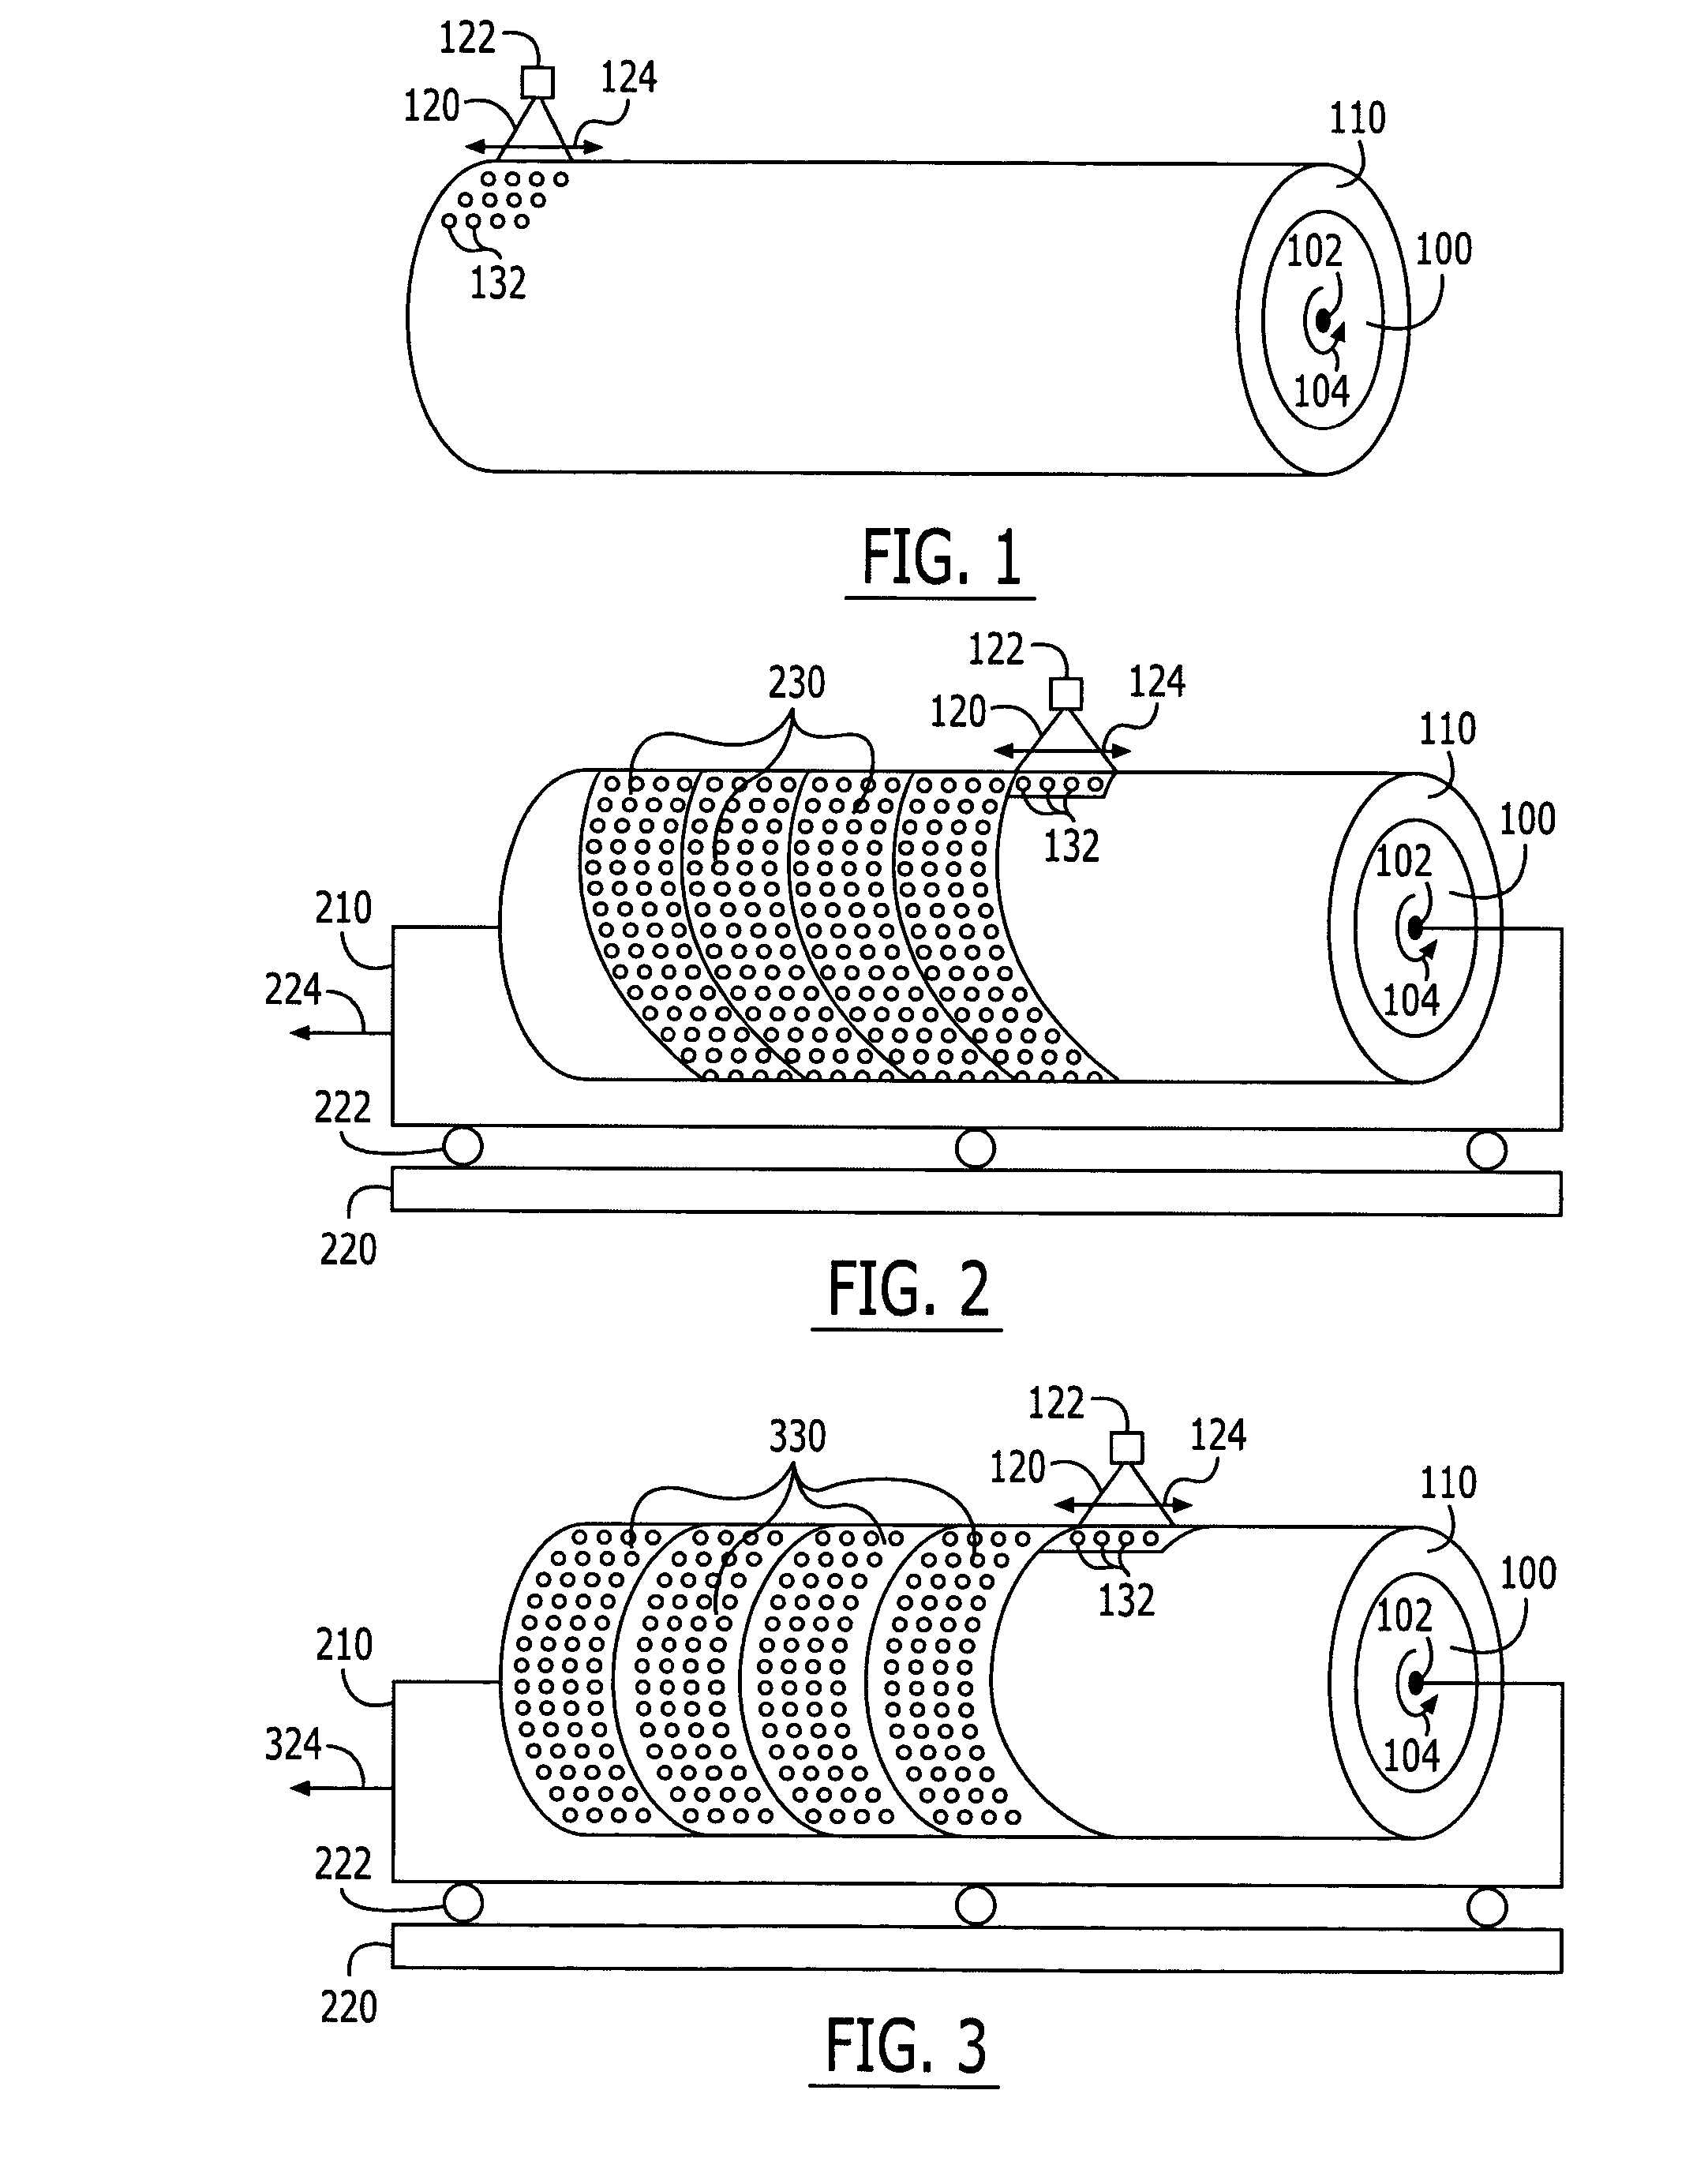 Methods for mastering microstructures through a substrate using negative photoresist